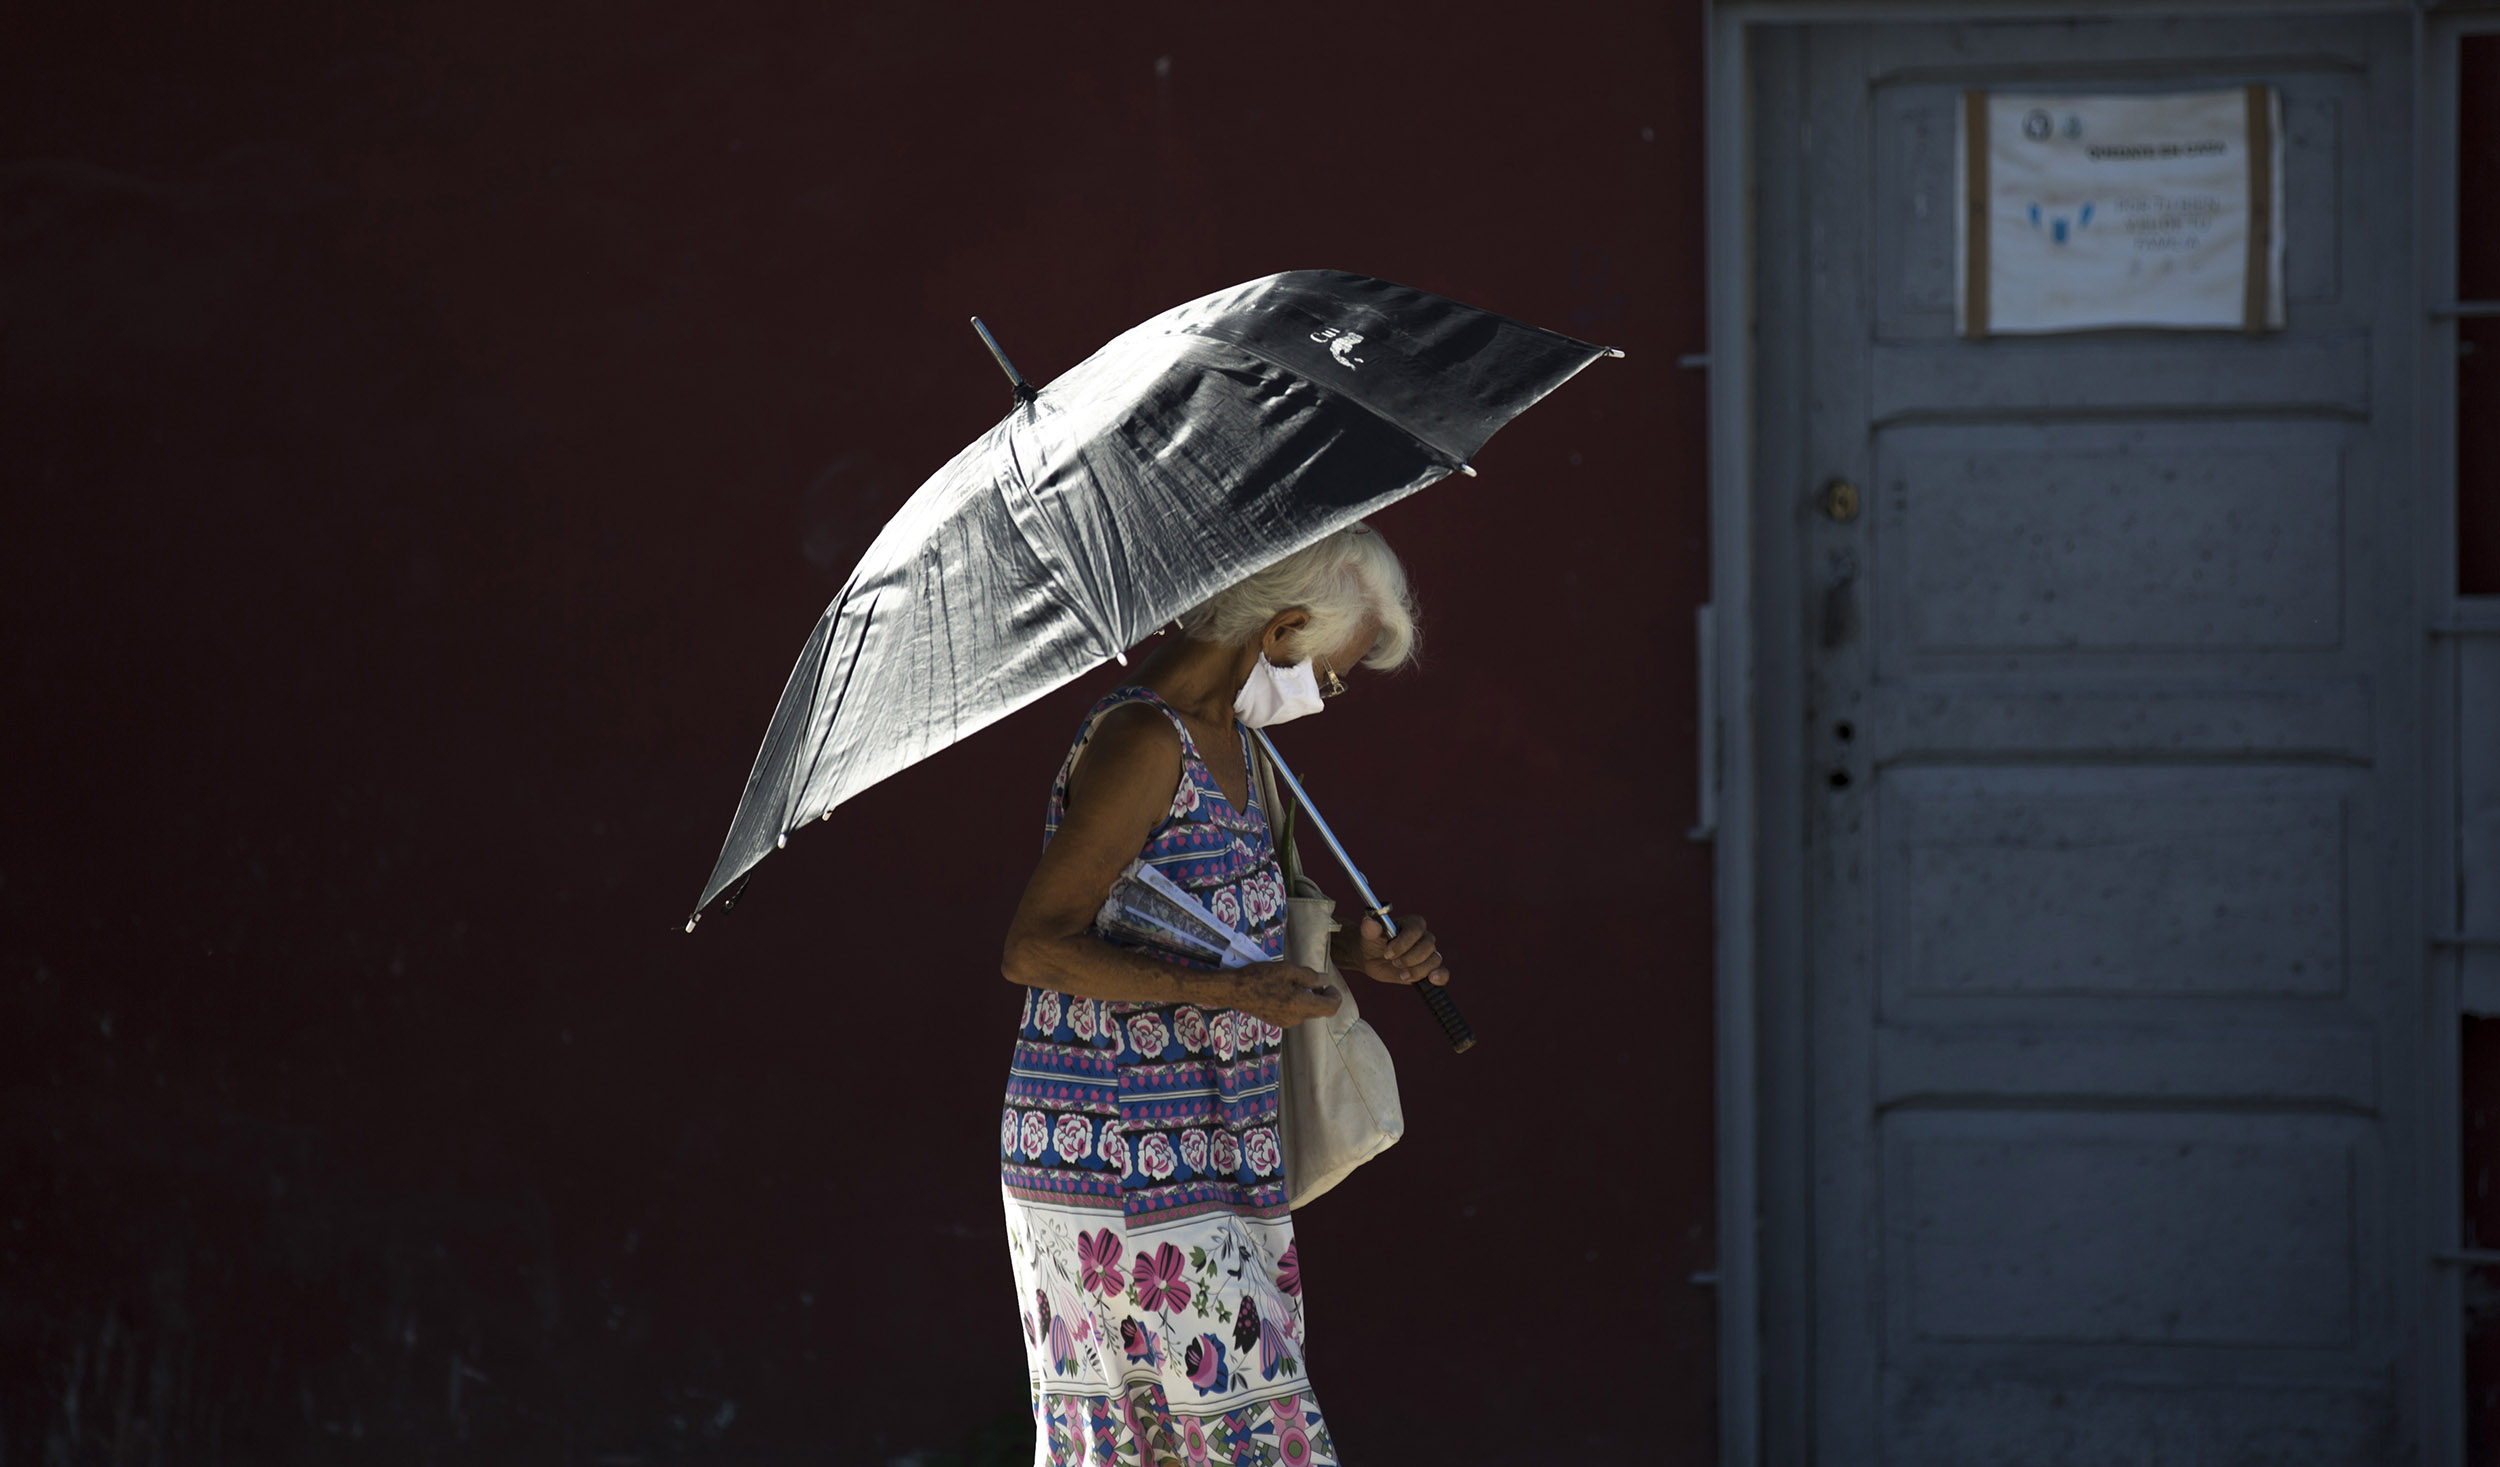 A pedestrian wearing a face mask amid the coronavirus pandemic uses a parasol in Havana, Cuba, on August 10. 